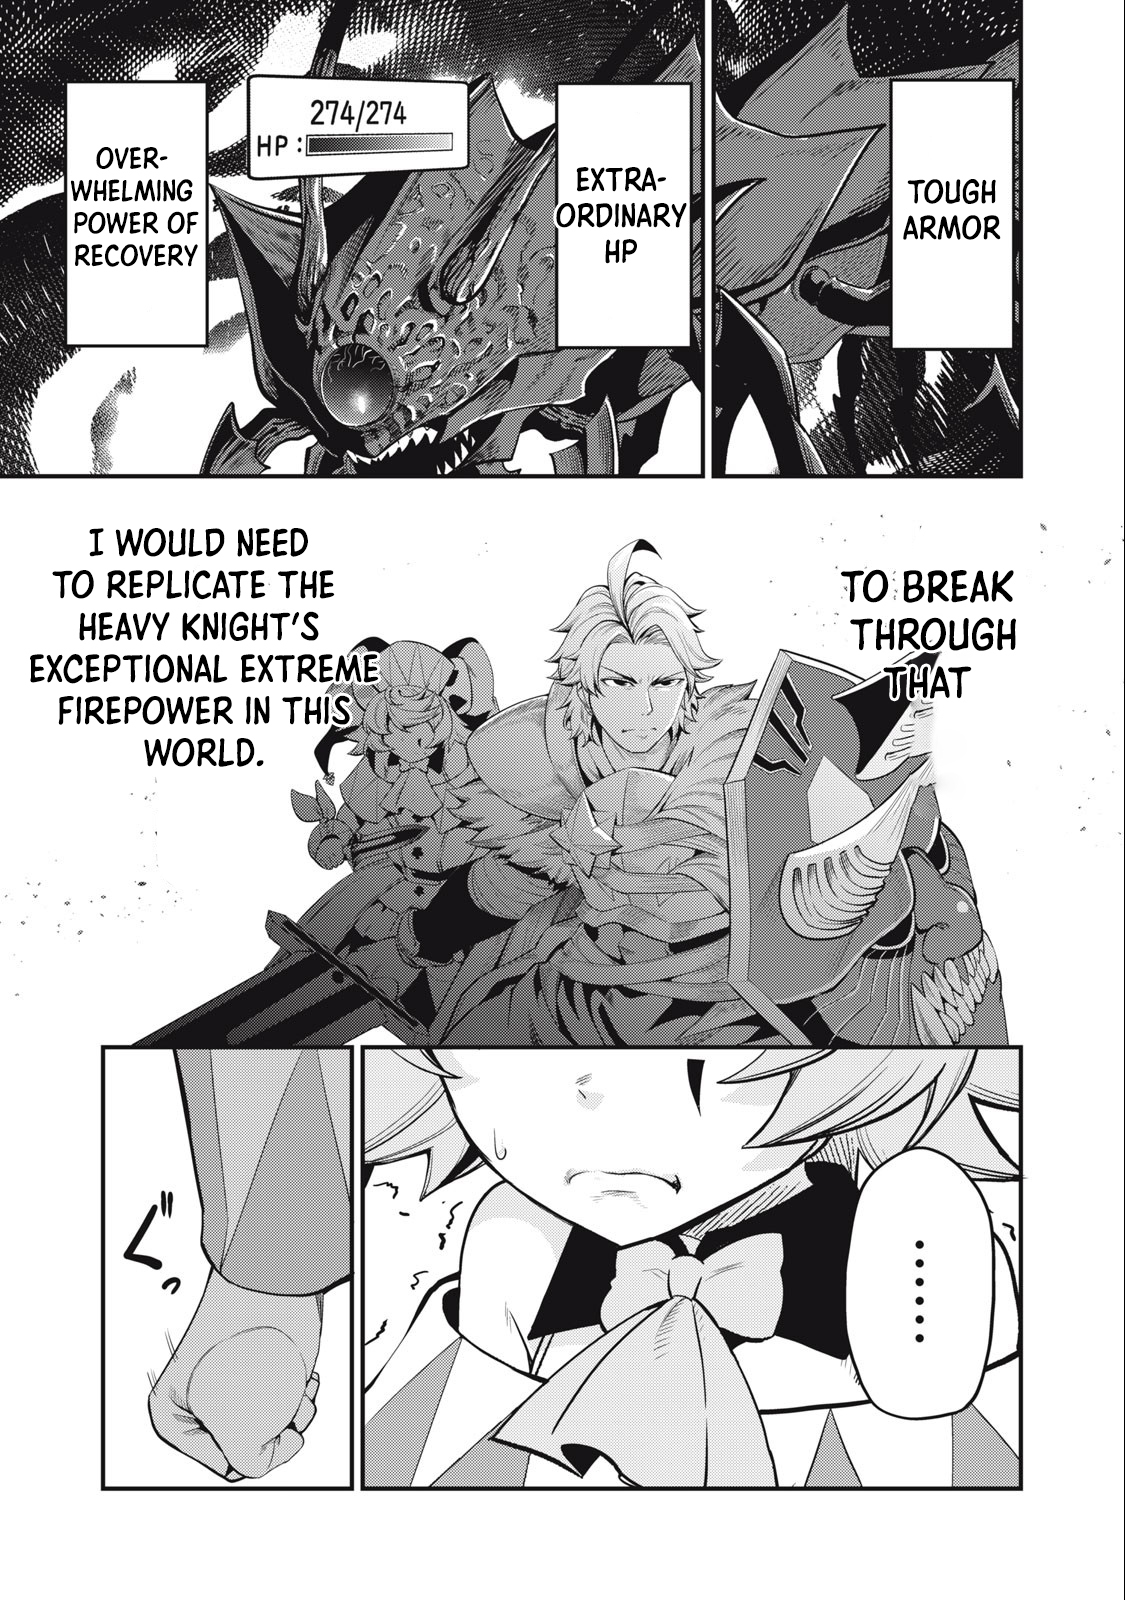 The Exiled Reincarnated Heavy Knight Is Unrivaled In Game Knowledge - Page 2